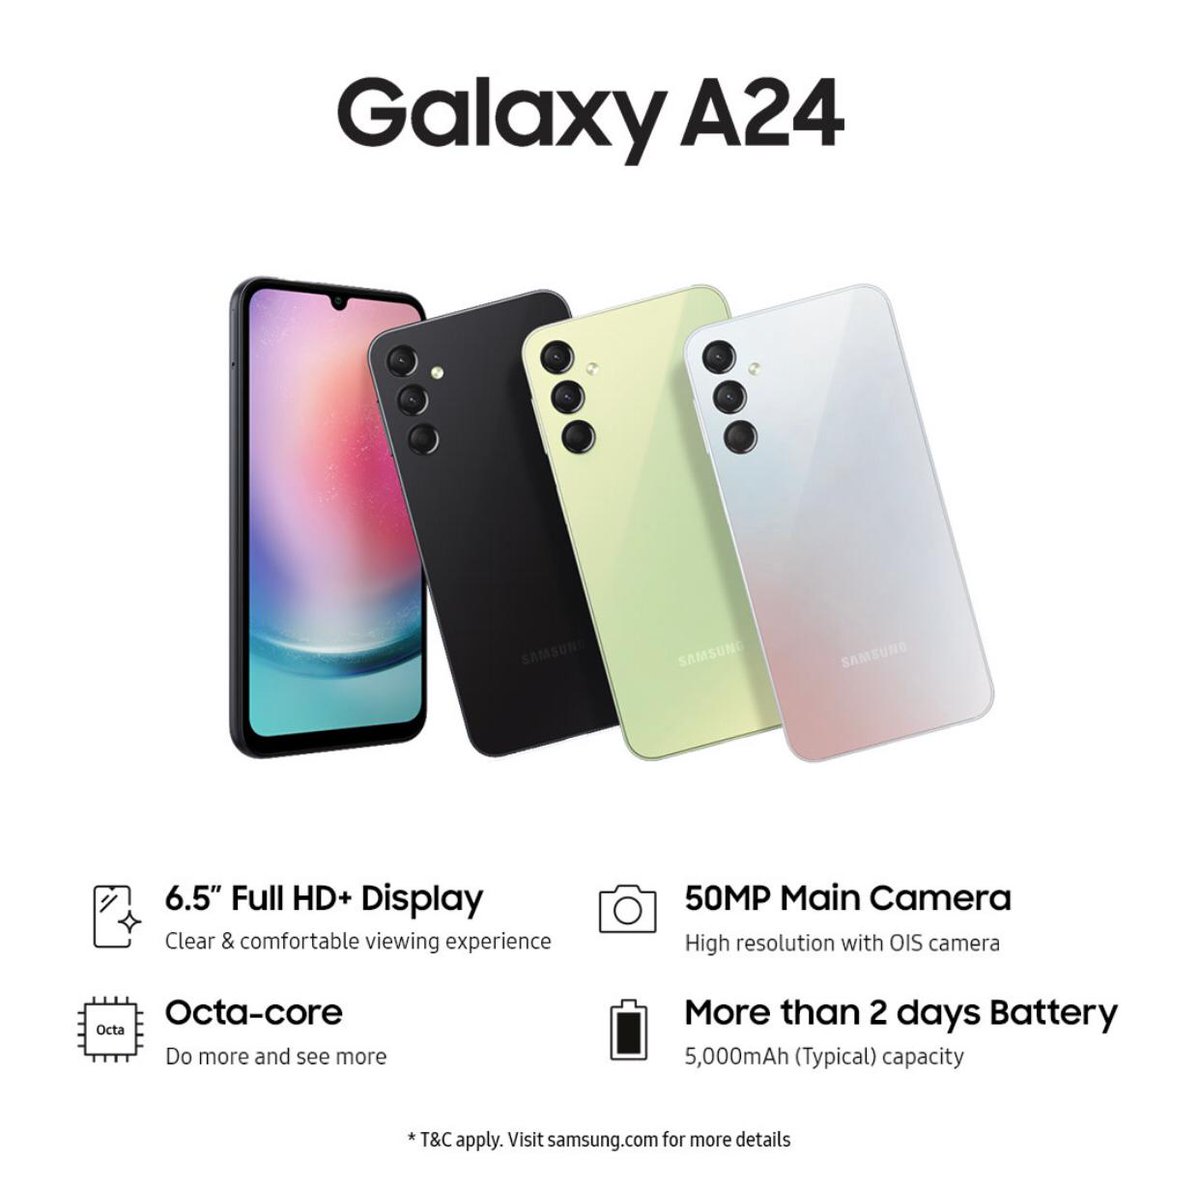 Guys, Imagine Having 50MP High Quality Camera With a 6.5' FHD screen and 5000.mah Battery Capacity.

Time to Upgrade to the #GalaxyASeriesKE and get Galaxy A34.

Check out linktr.ee/samsungkenya
Remember you get one Time Free Screen Replacement  
#AwesomeIsForEveryone